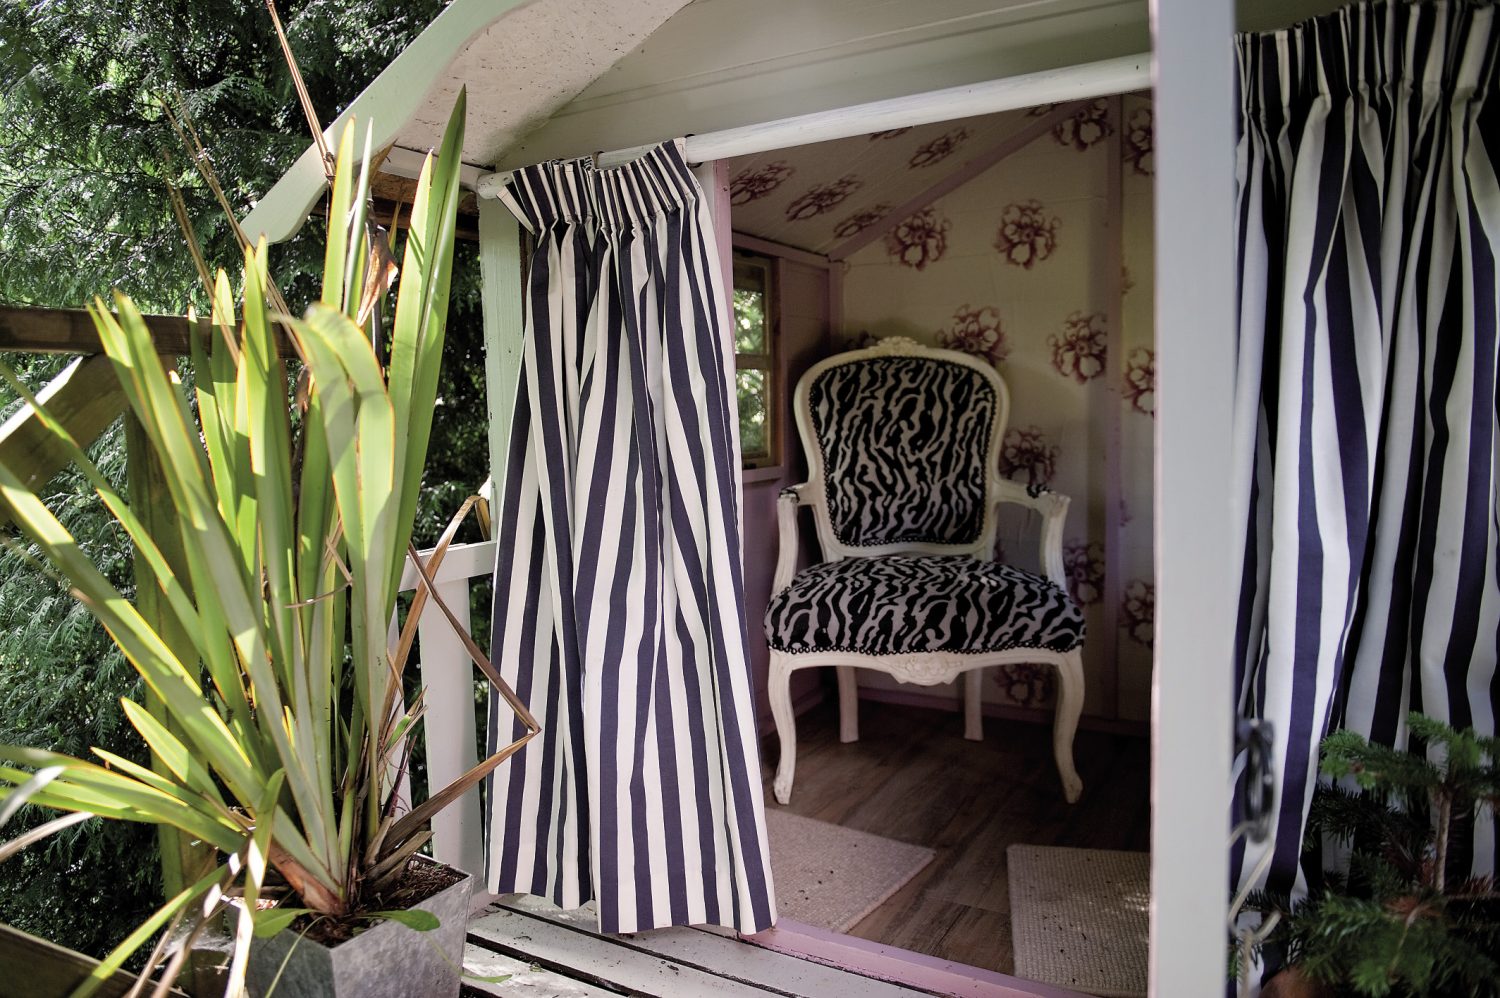 Down another set of steps and there, among the boughs of a fine oak tree is the treehouse, now painted white, with nautical blue and white striped curtains. Inside, Andrew has wallpapered it and added just one, throne-like chair